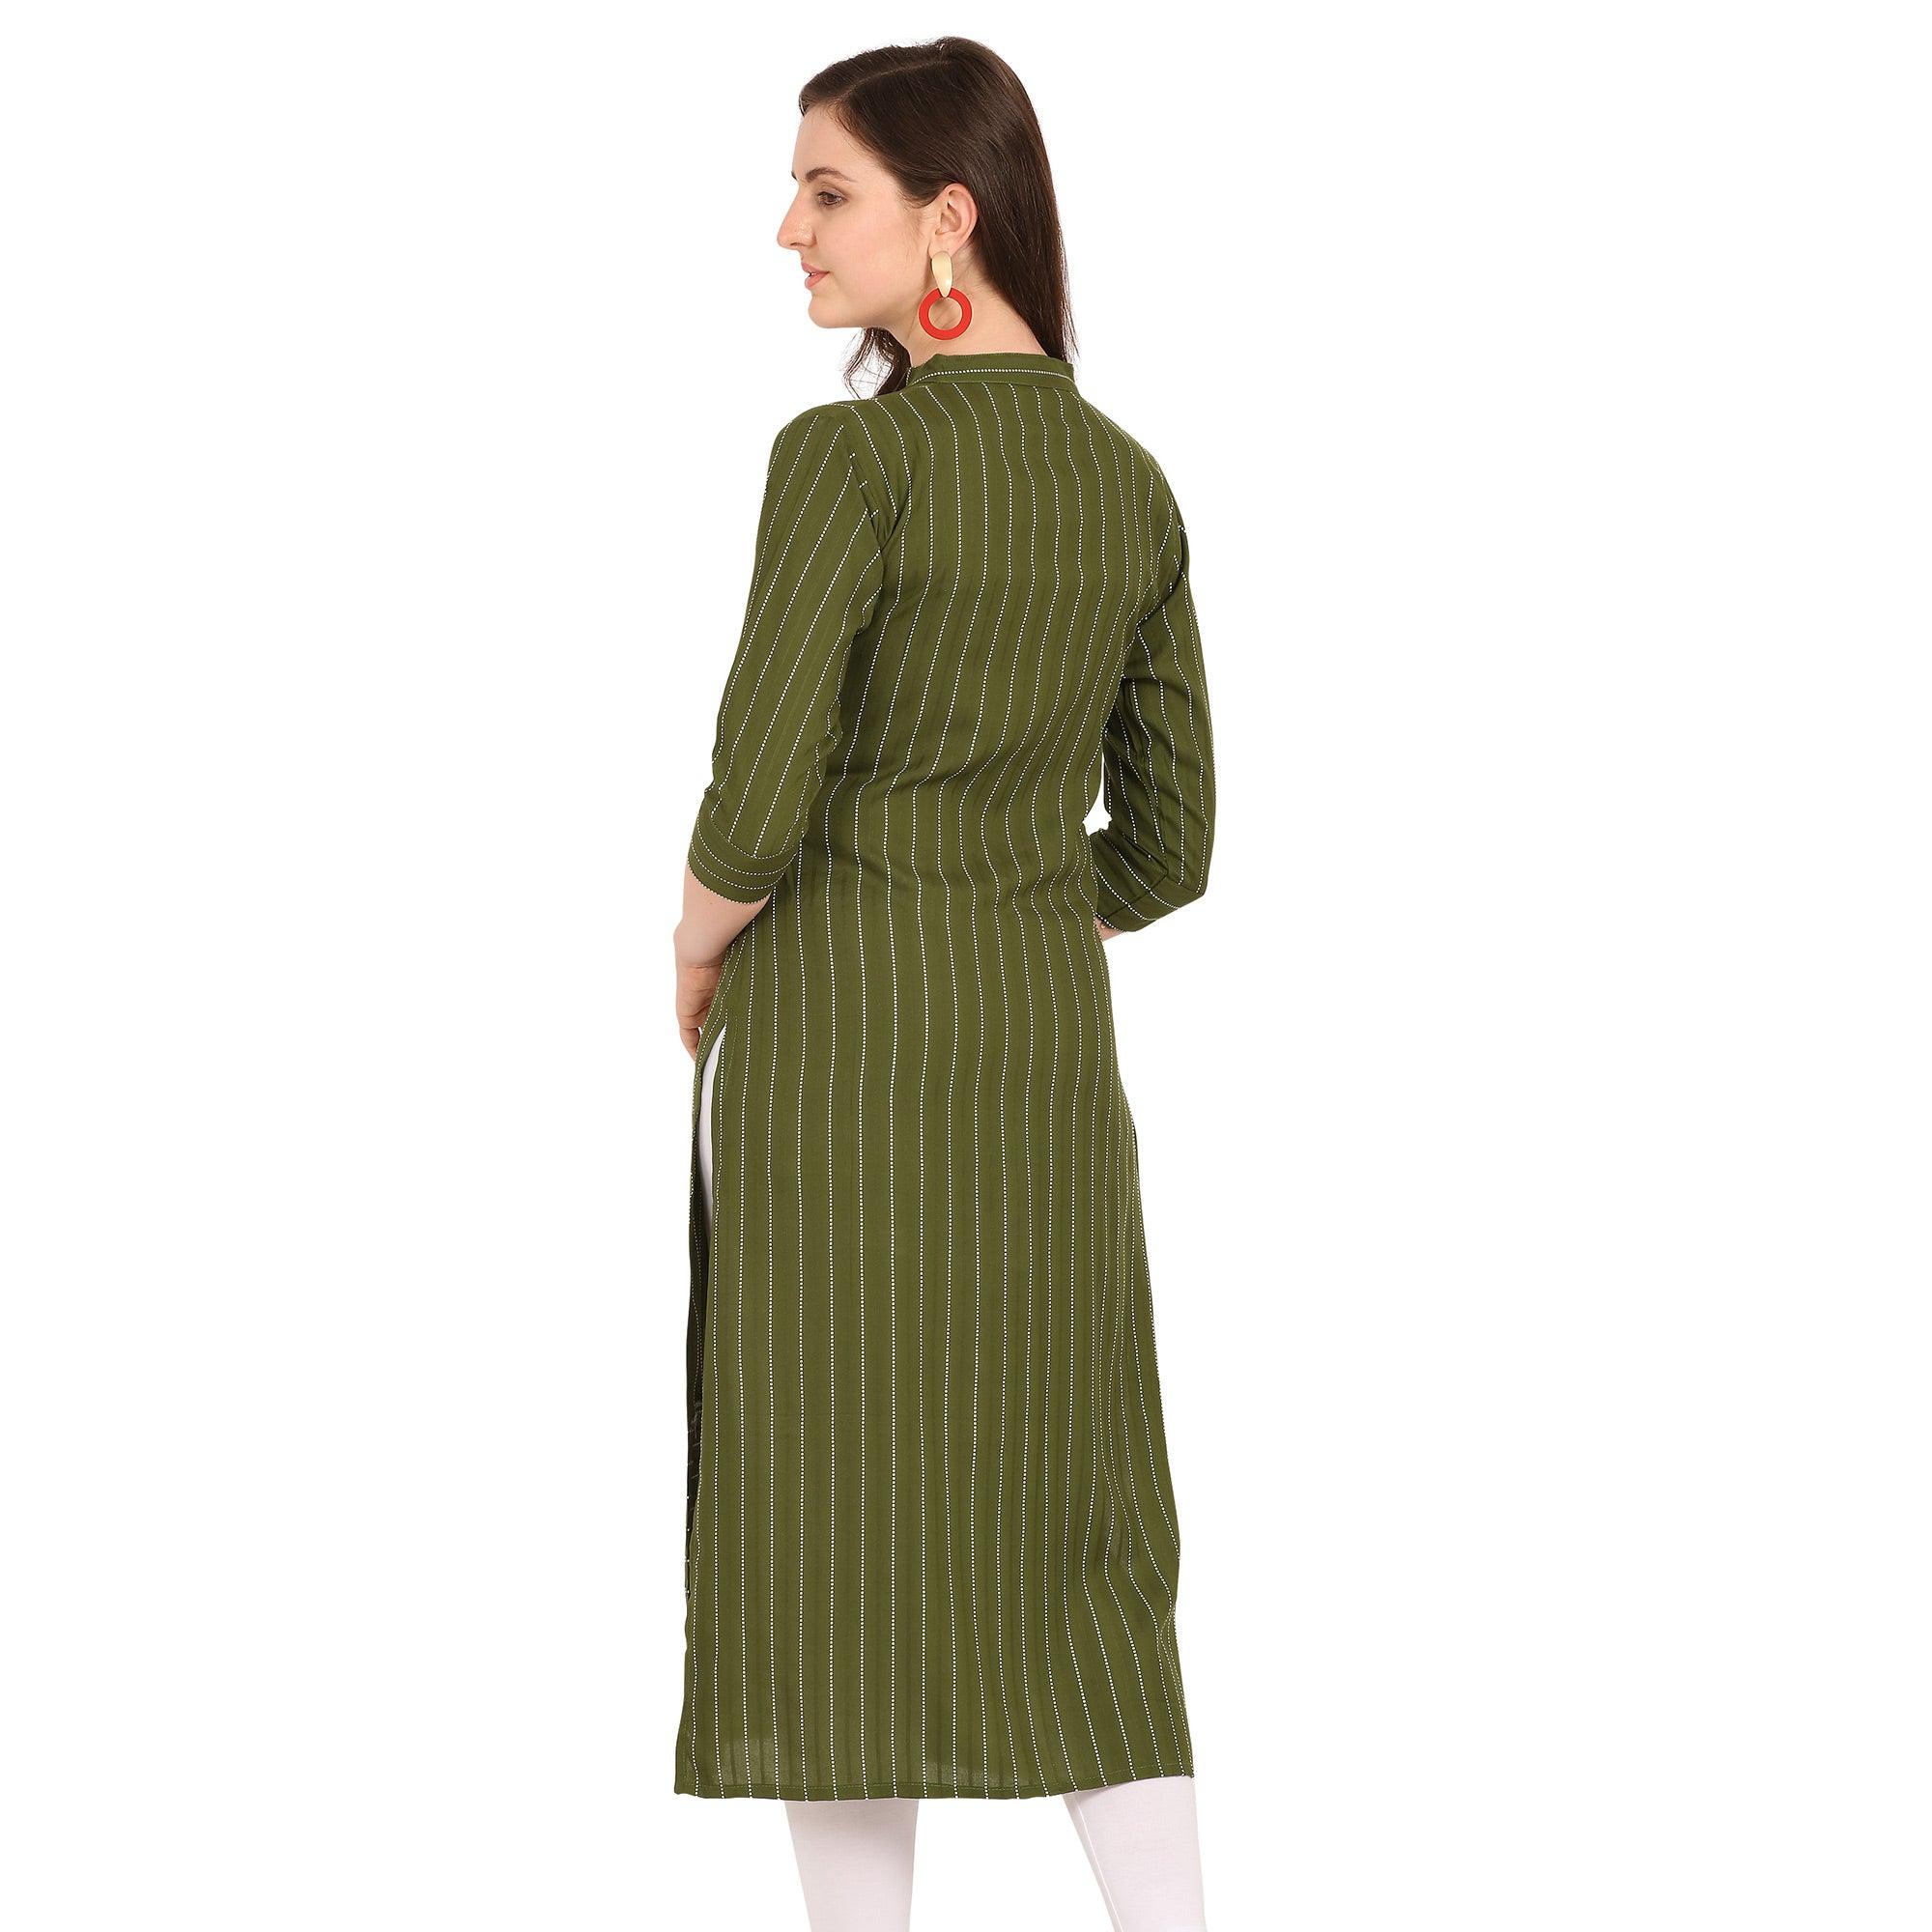 Trendy Green Colored Party Wear Embellished Work Rayon Kurti - Peachmode